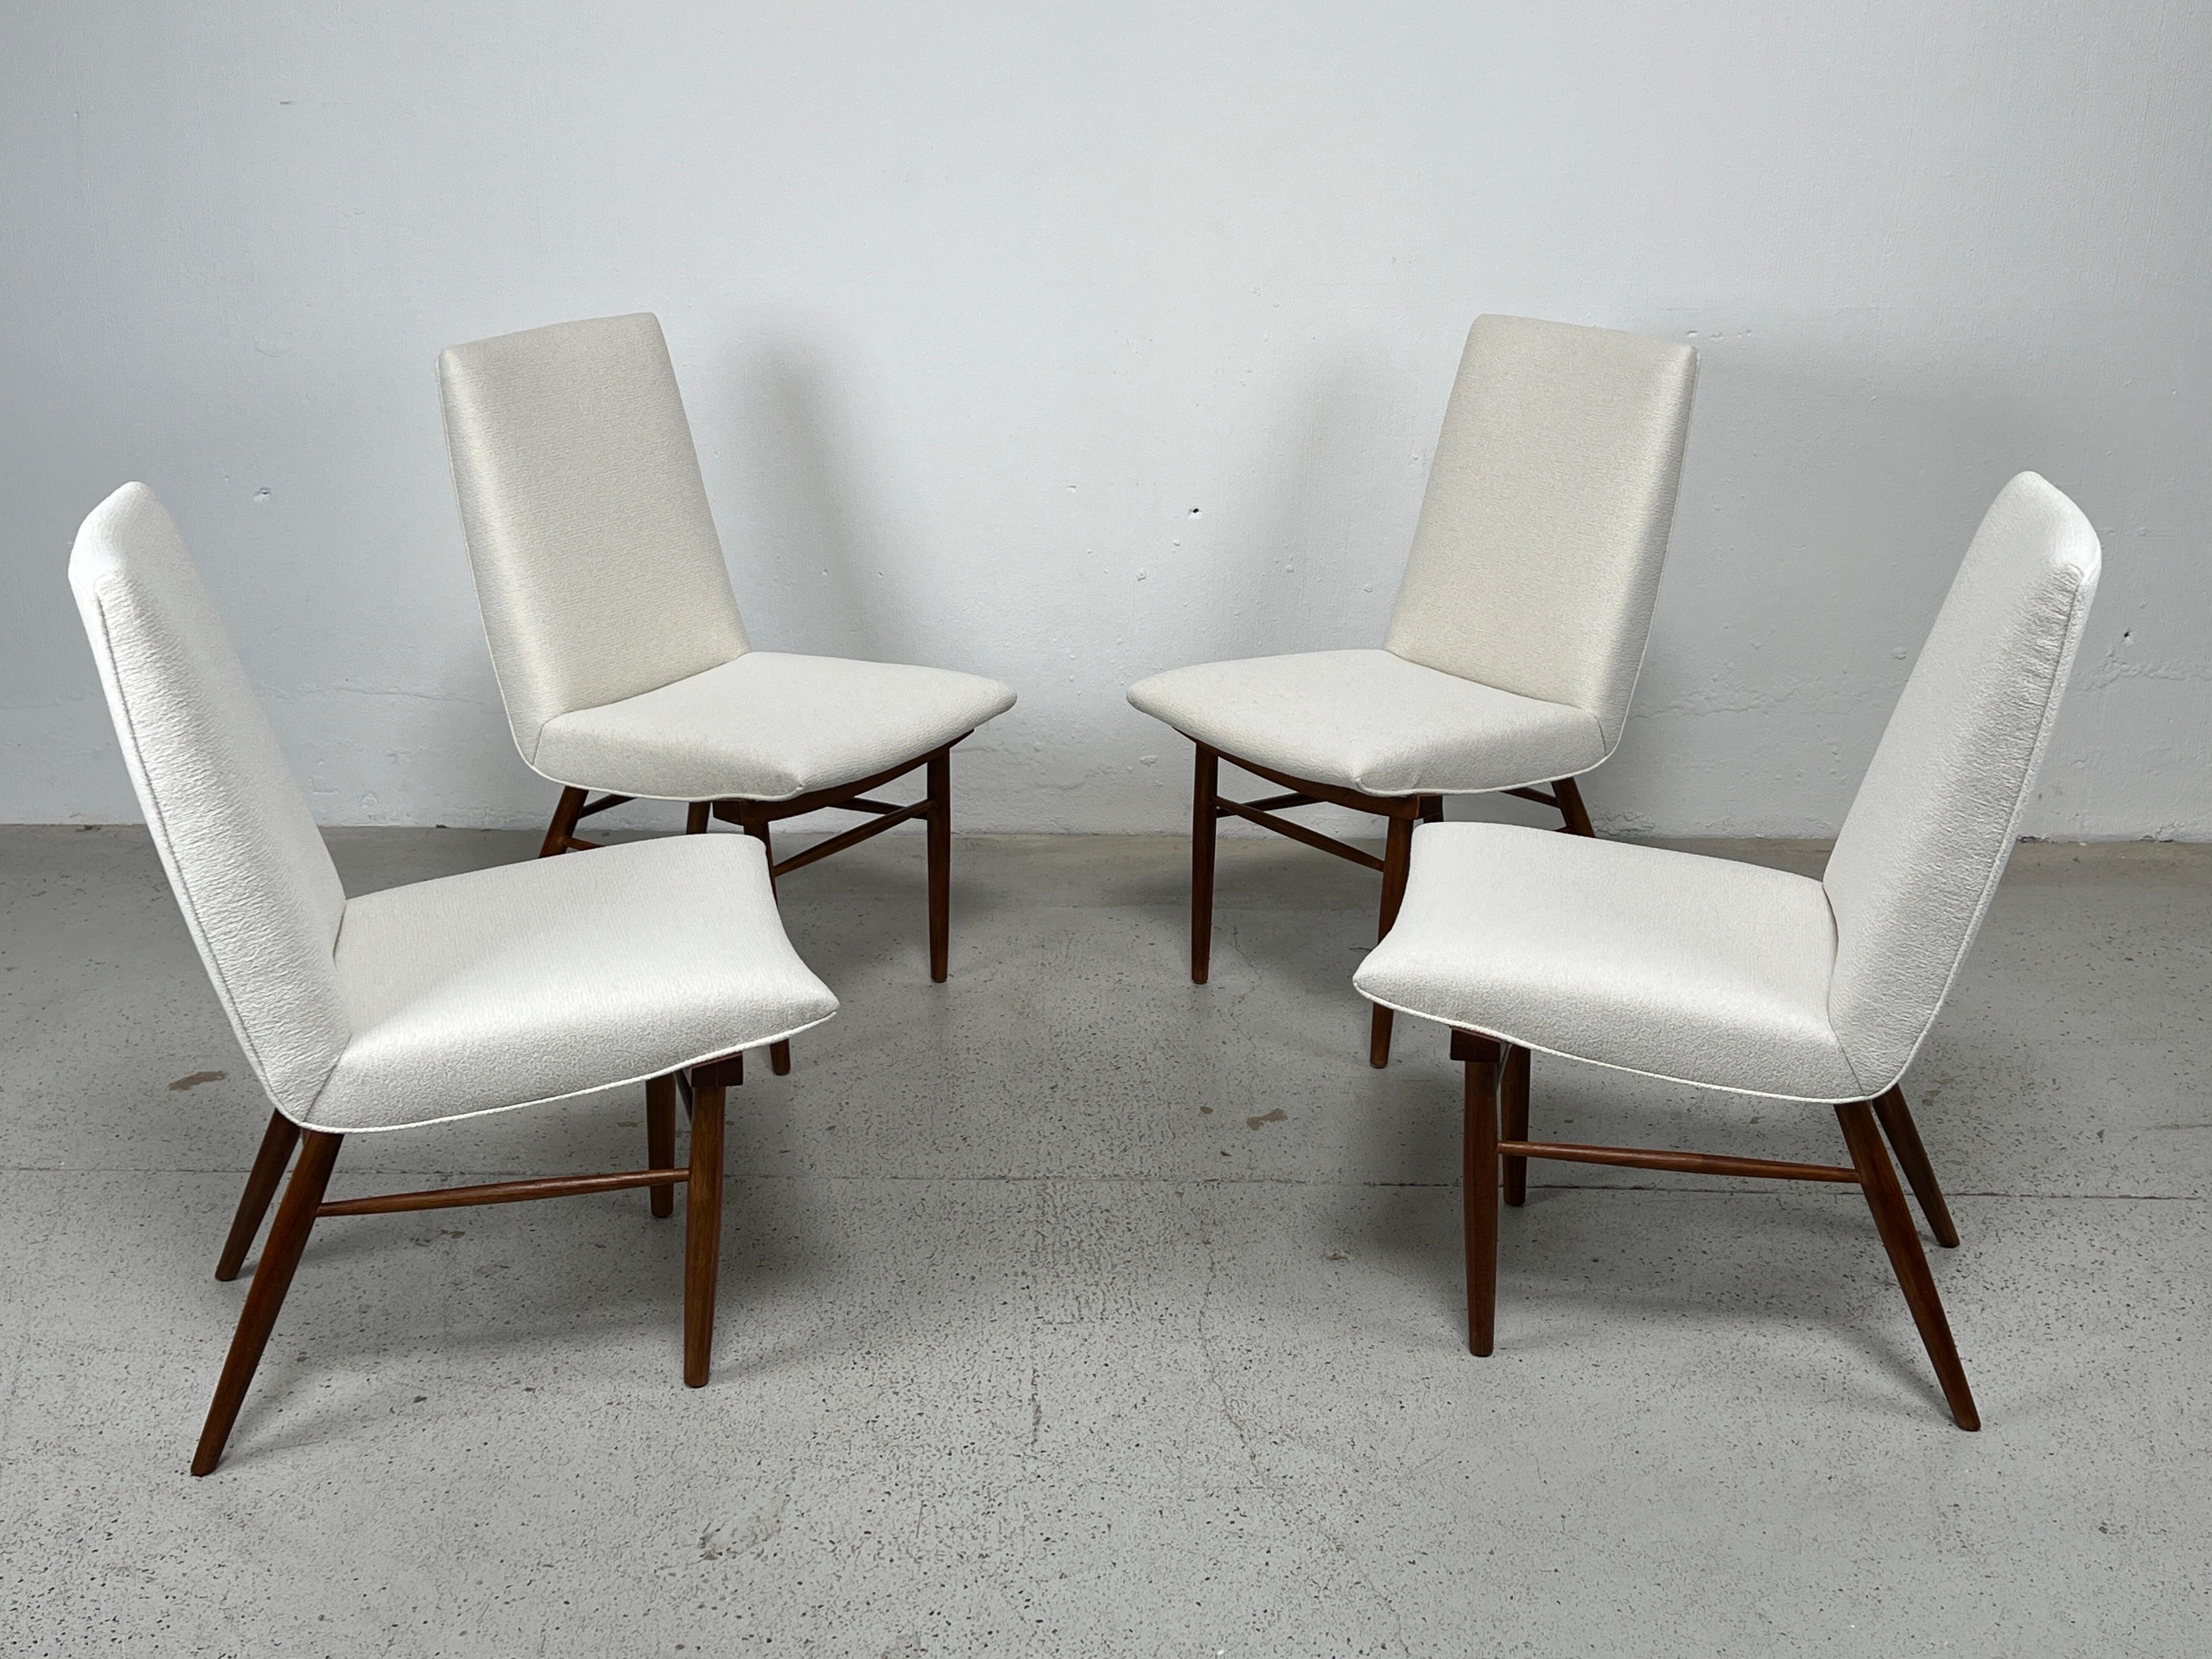 Set of Four George Nakashima Model 206 Dining Chairs for Widdicomb In Good Condition For Sale In Dallas, TX